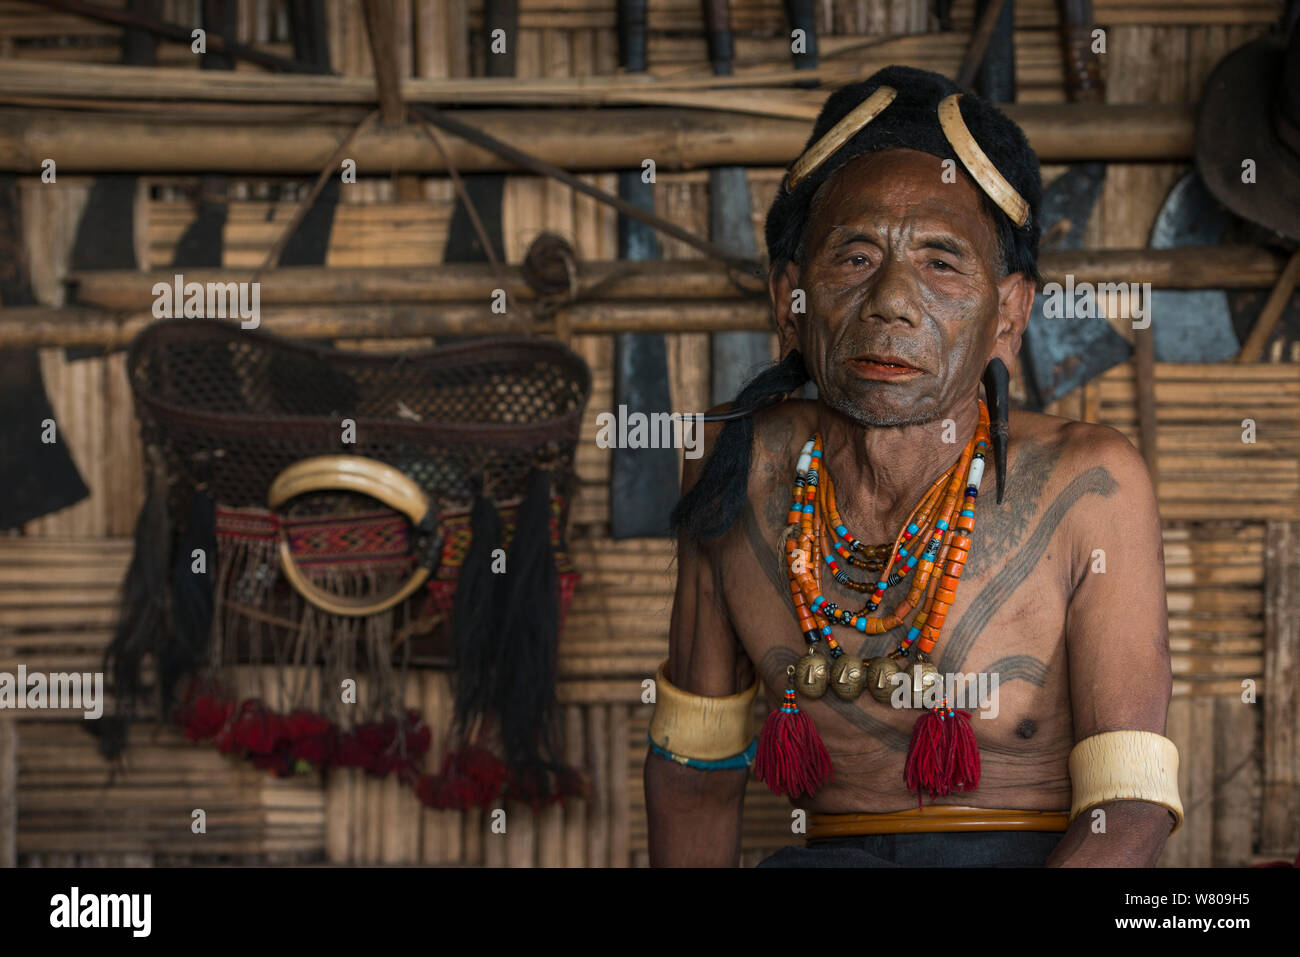 Konyak Naga tattooed chief head hunter with traditional ornamentation of Elephant ivory arm bands and Hornbill headdress. Only someone who has killed and taken a human head can be tattooed in this manner. Mon district. Nagaland,  North East India, October 2014. Stock Photo